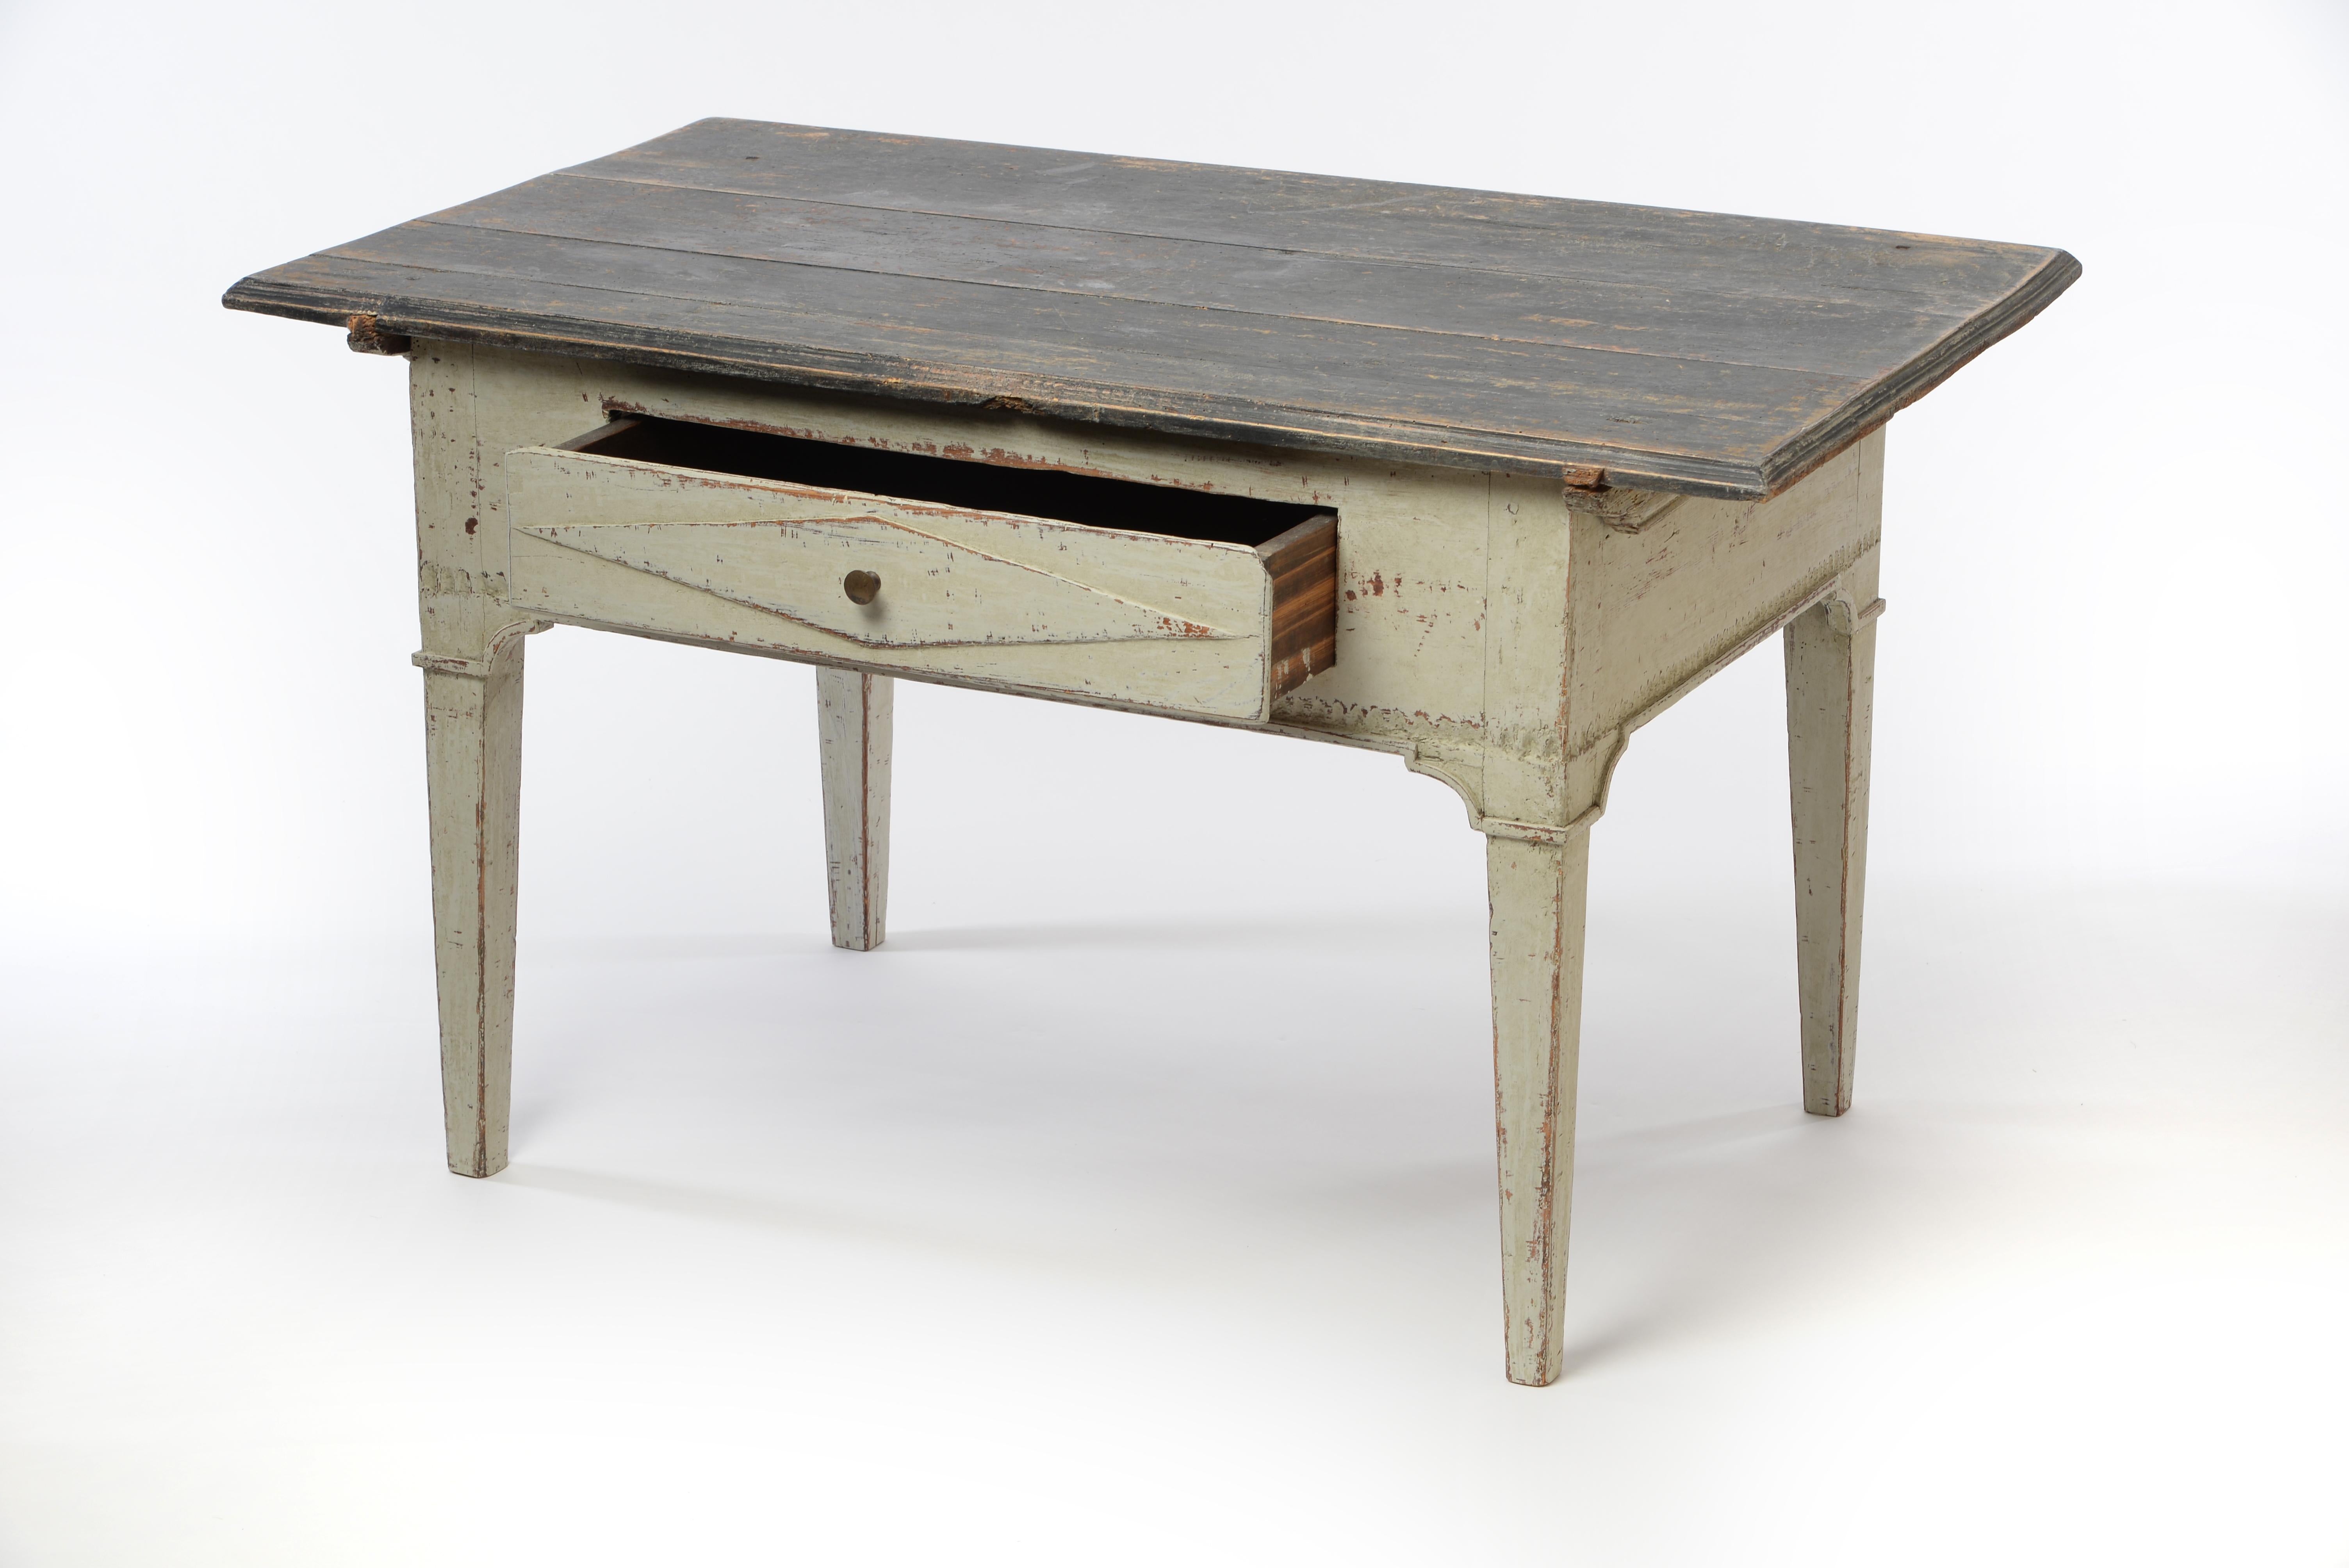 This unique Gustavian low table has a very charming appearance due to its low height, front drawer, and overlapping tabletop. The darker tabletop which is removable adds strength to the table. A wonderful piece that speaks for itself. For further